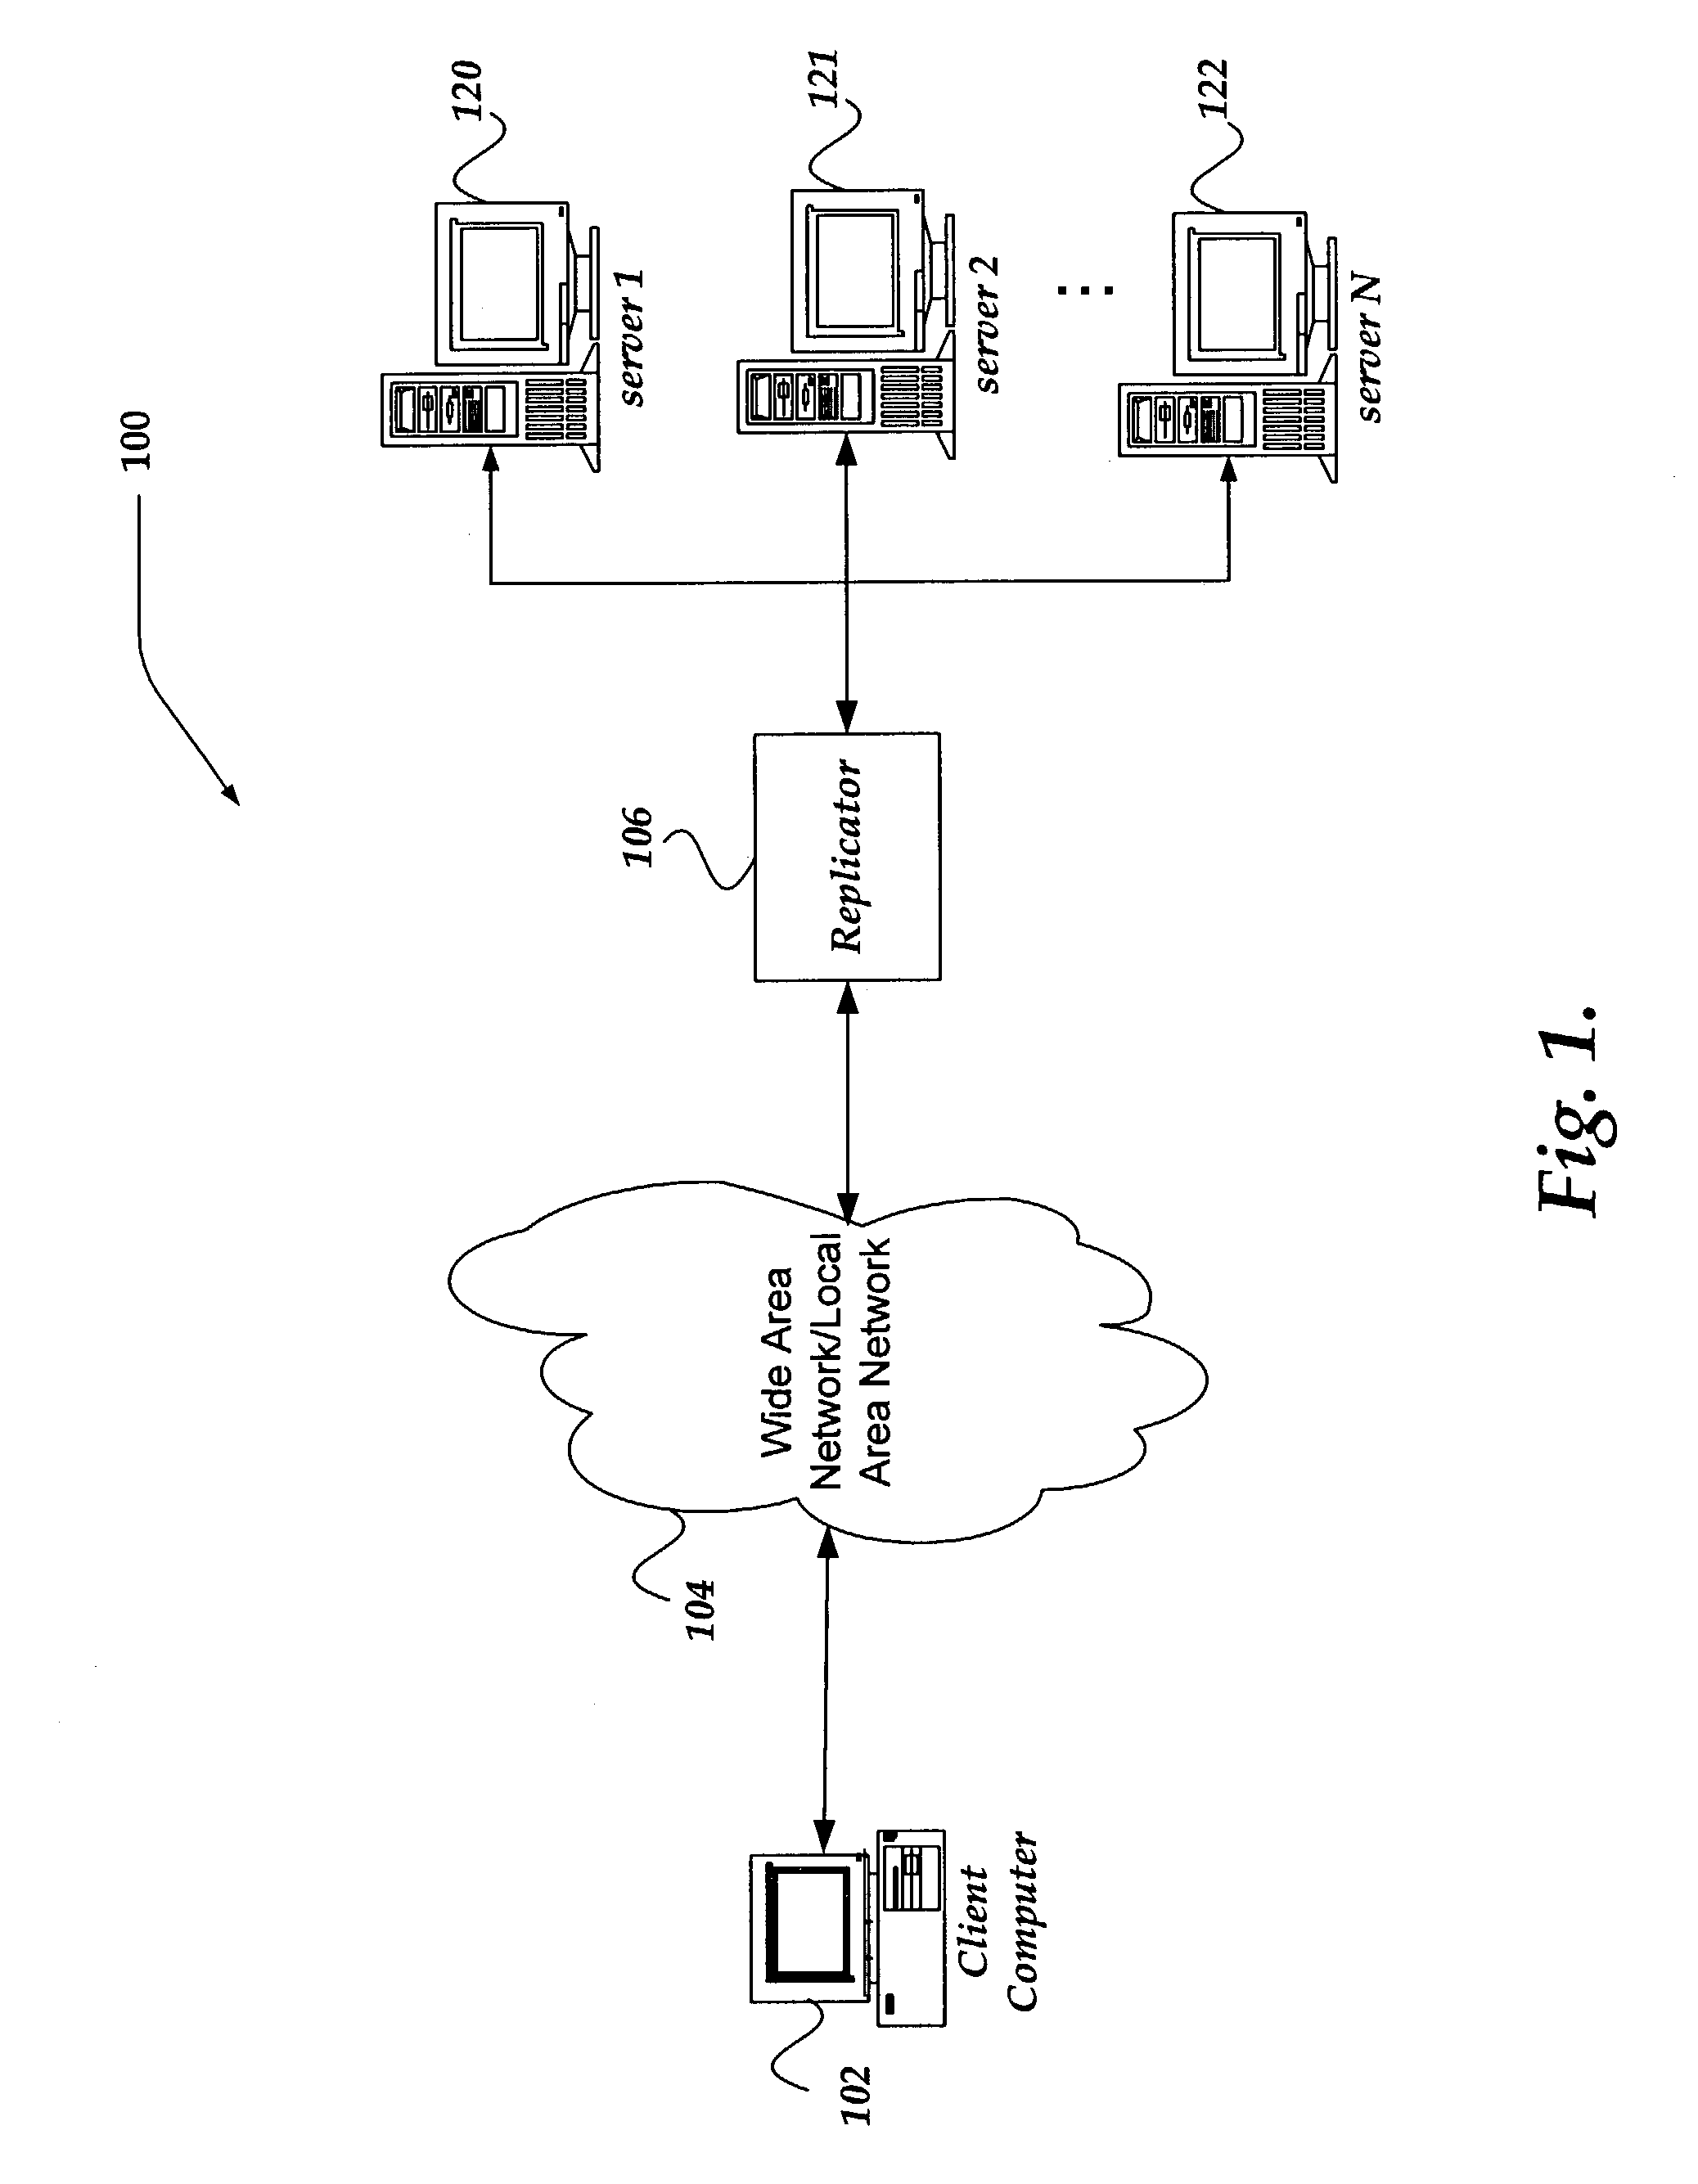 Method and system for replicating content over a network